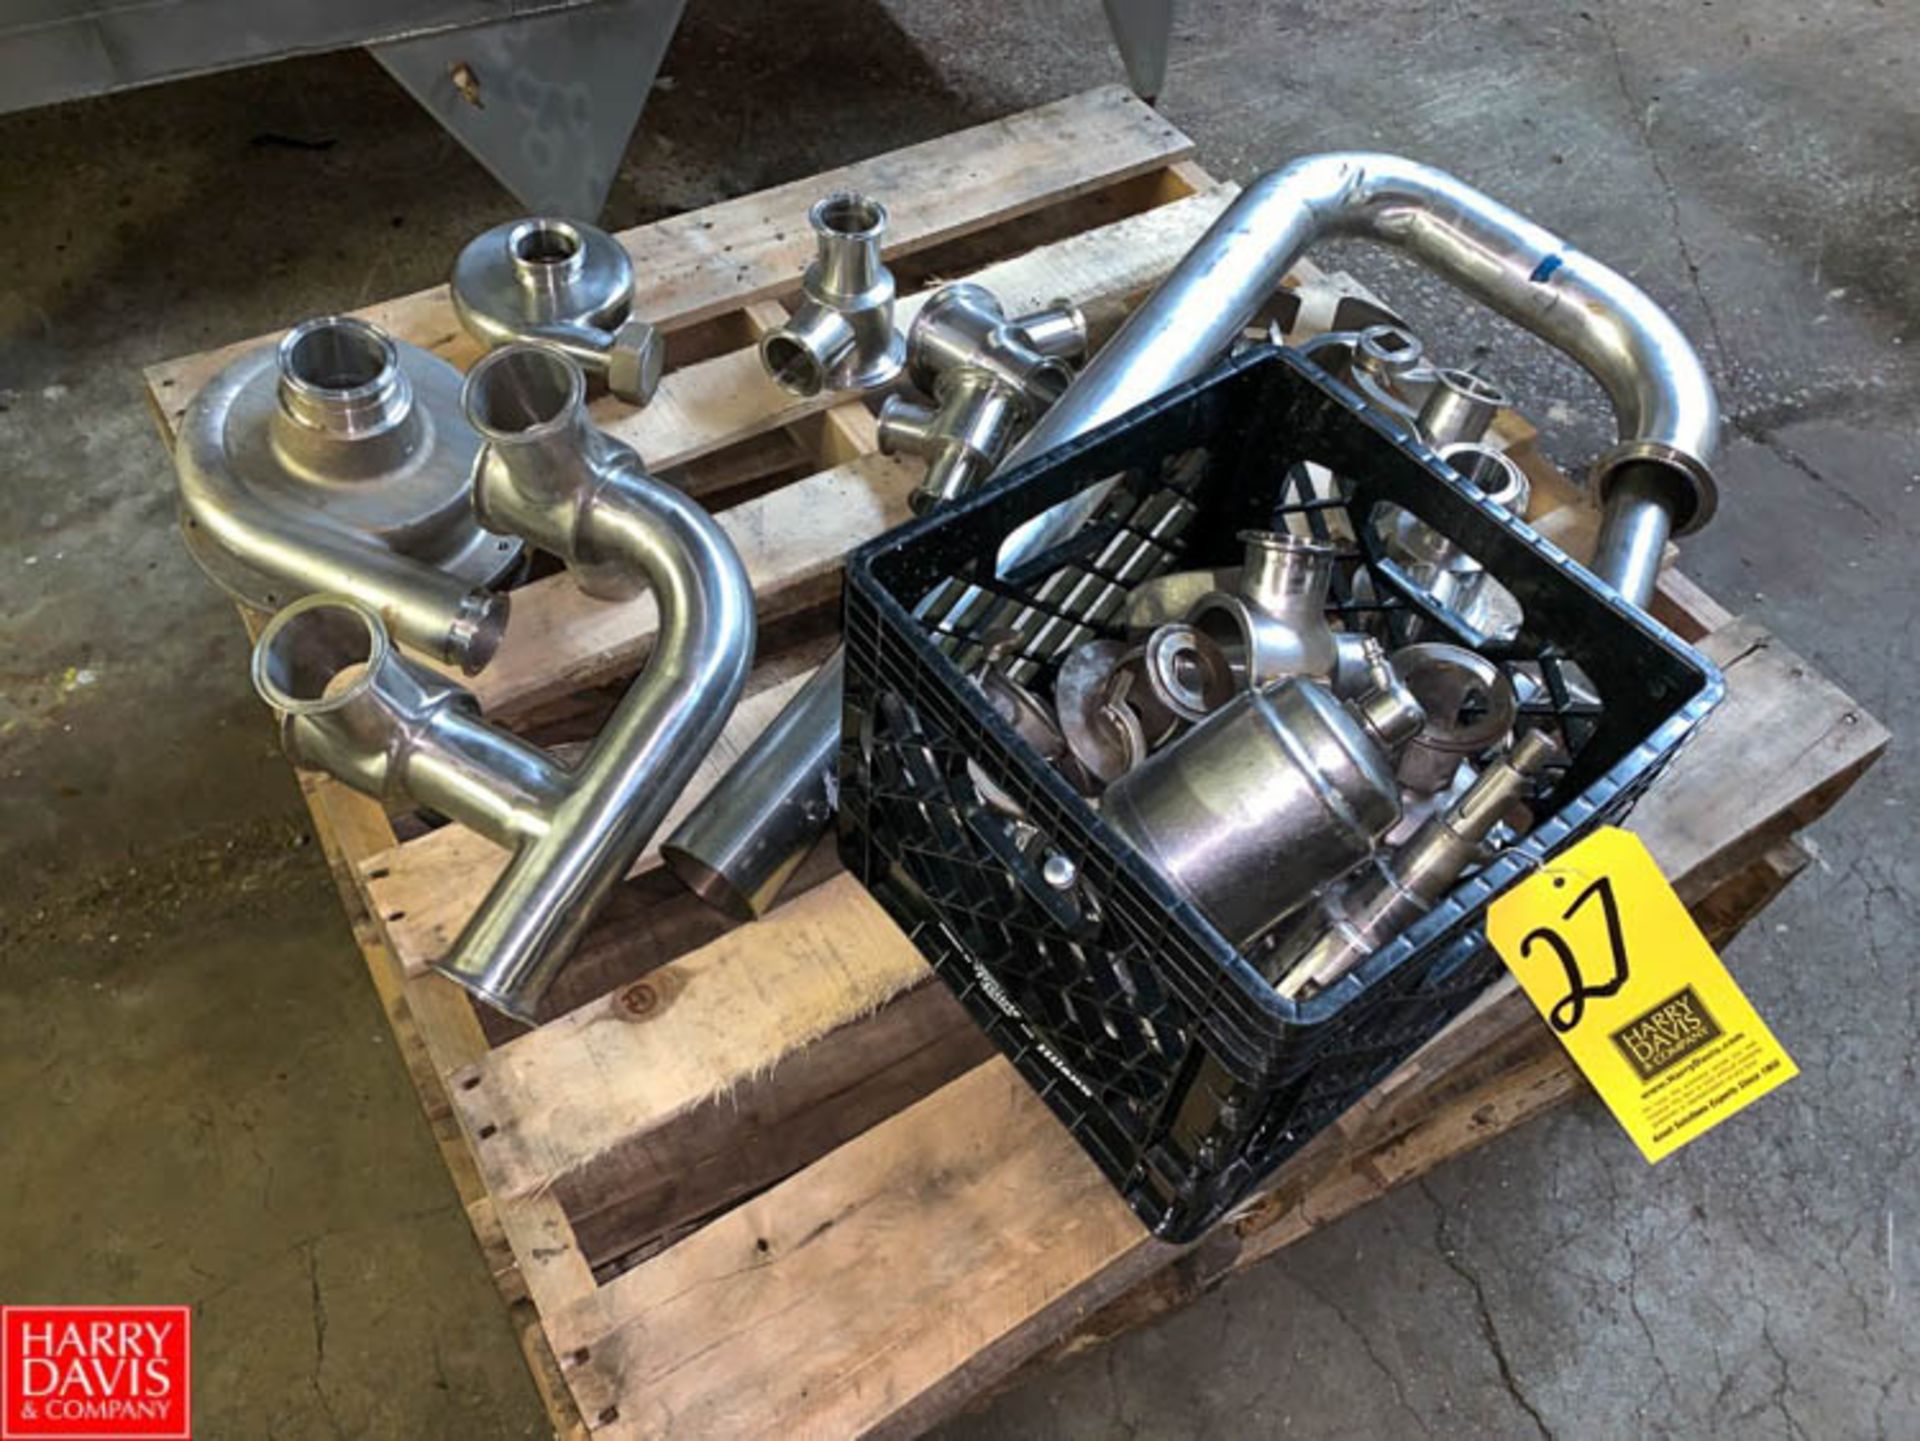 Assorted Air Valve Bodies, Actuators, S/S Pump Head and More, Up to 3" - Rigging: $25